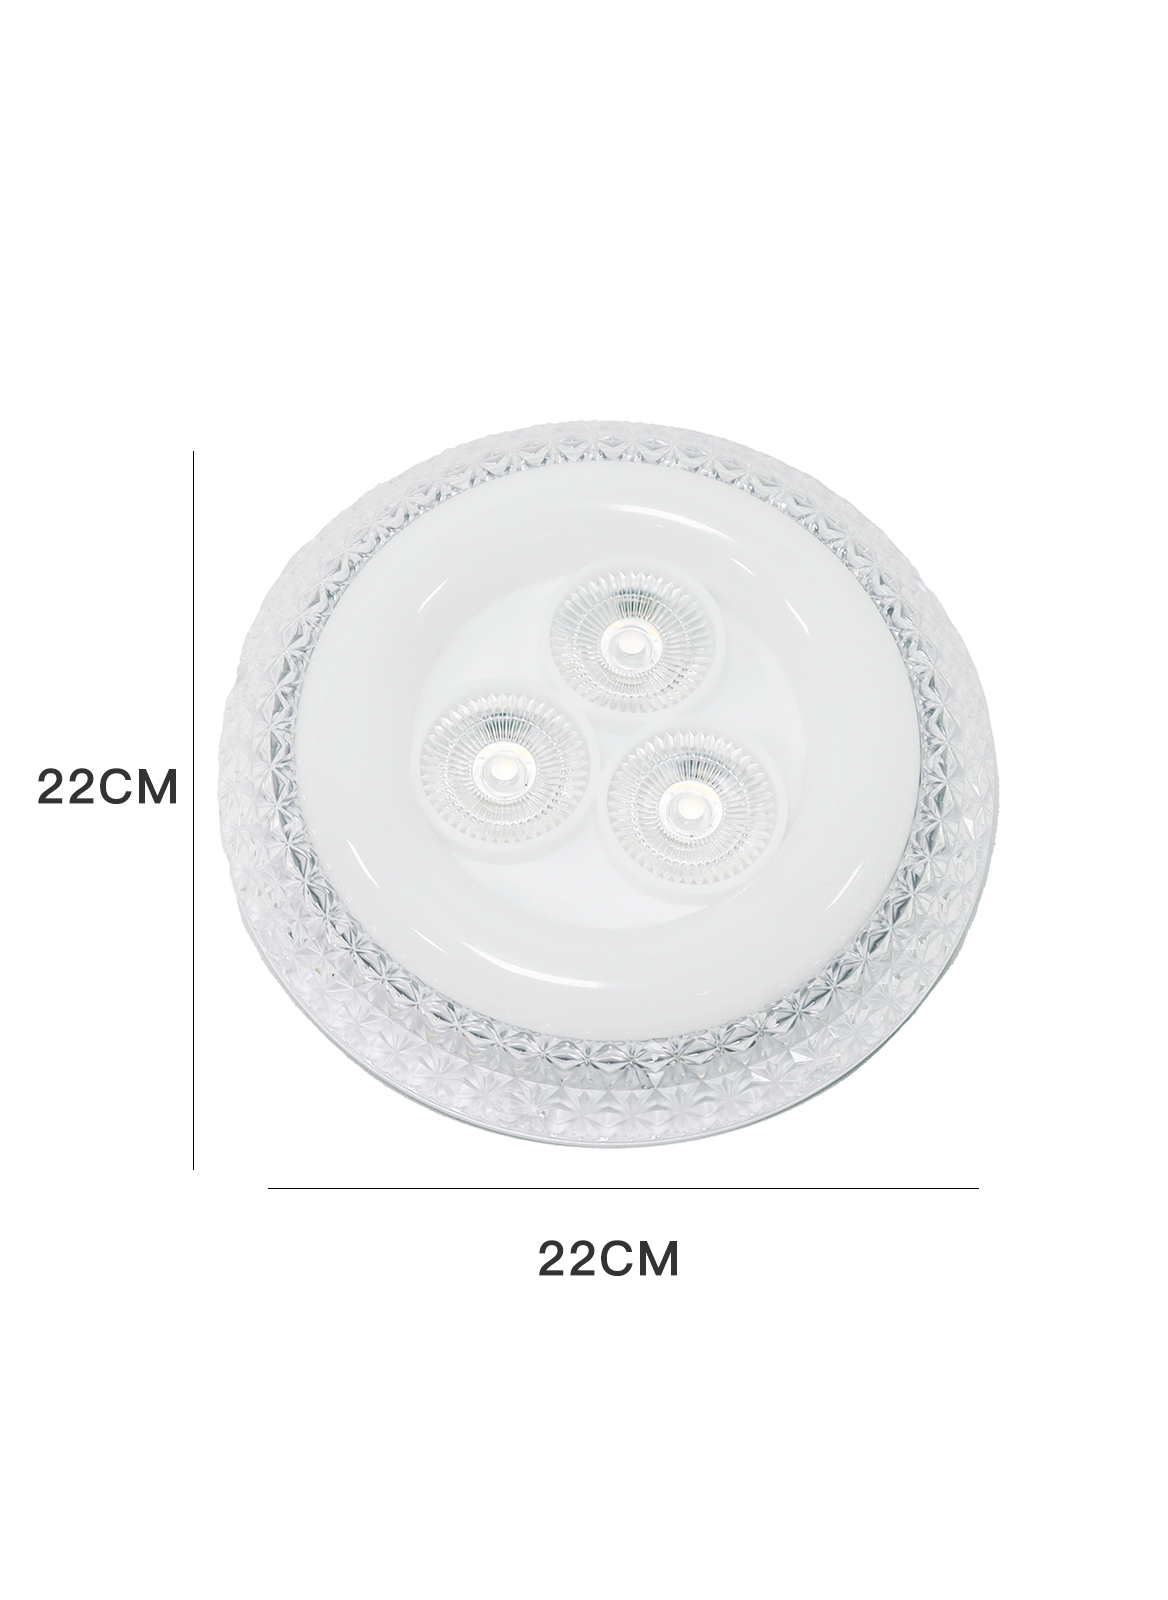 RGB Household 3-speed Dimming Atmosphere Disc Spot Light 35W